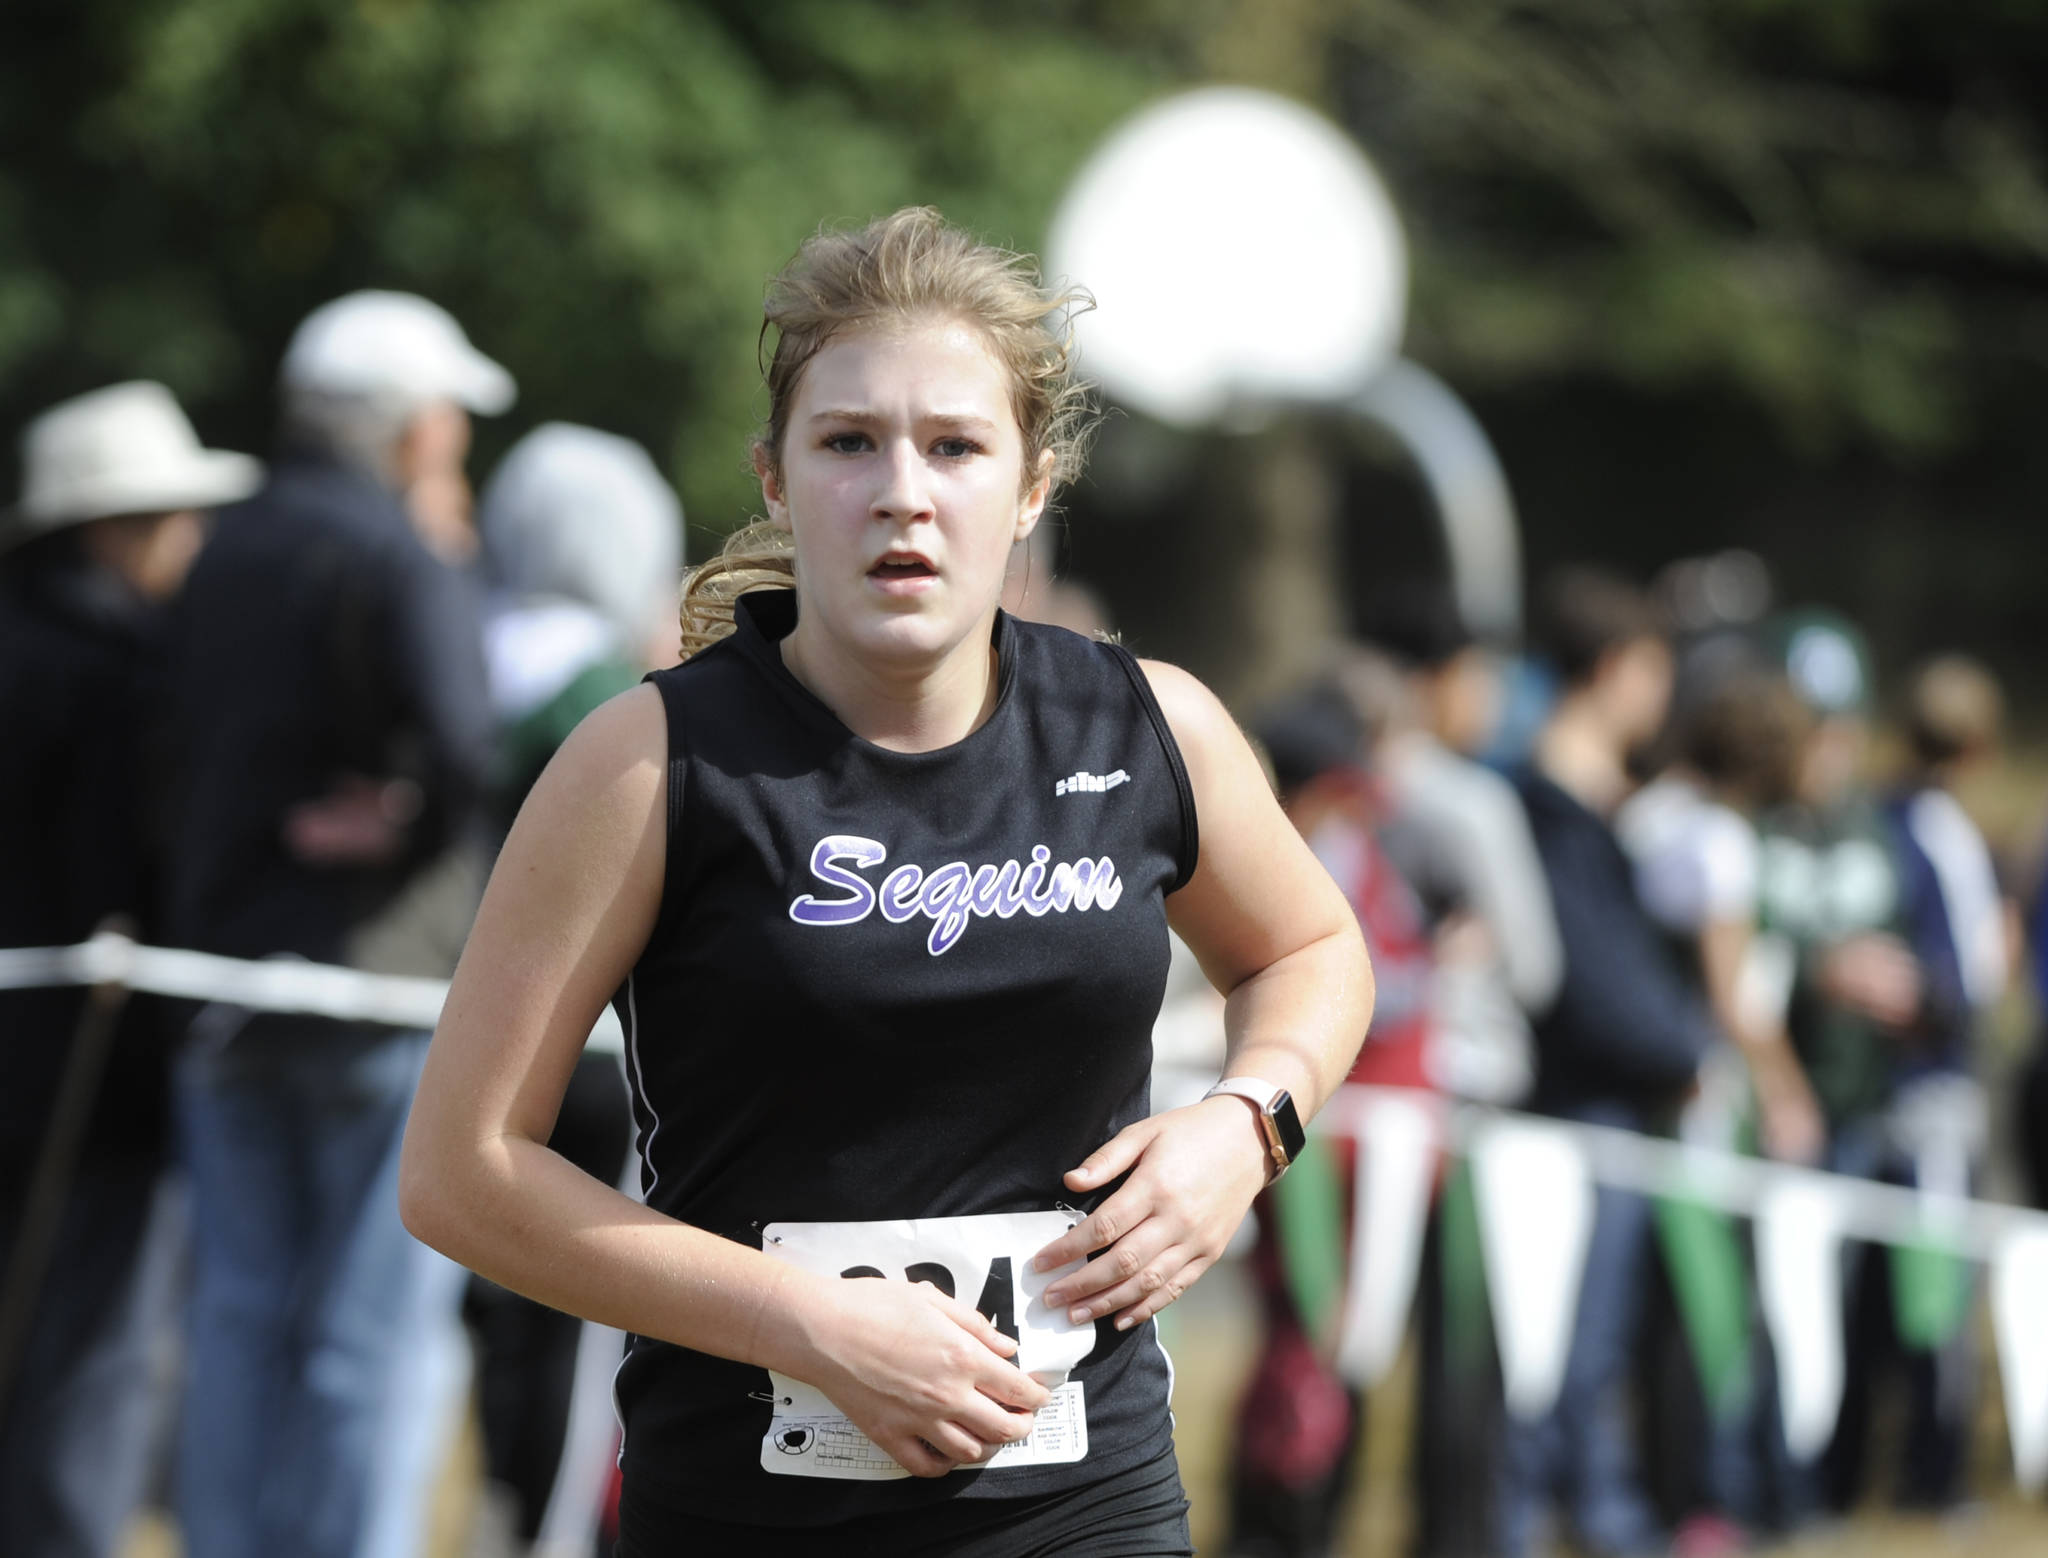 Sequim High senior Emily Silva, pictured here racing at the Salt Creek Invitational in 2019, recently signed a letter of intent to compete in cross country and track at Olympic College. (Michael Dashiell/Olympic Peninsula News Group file)